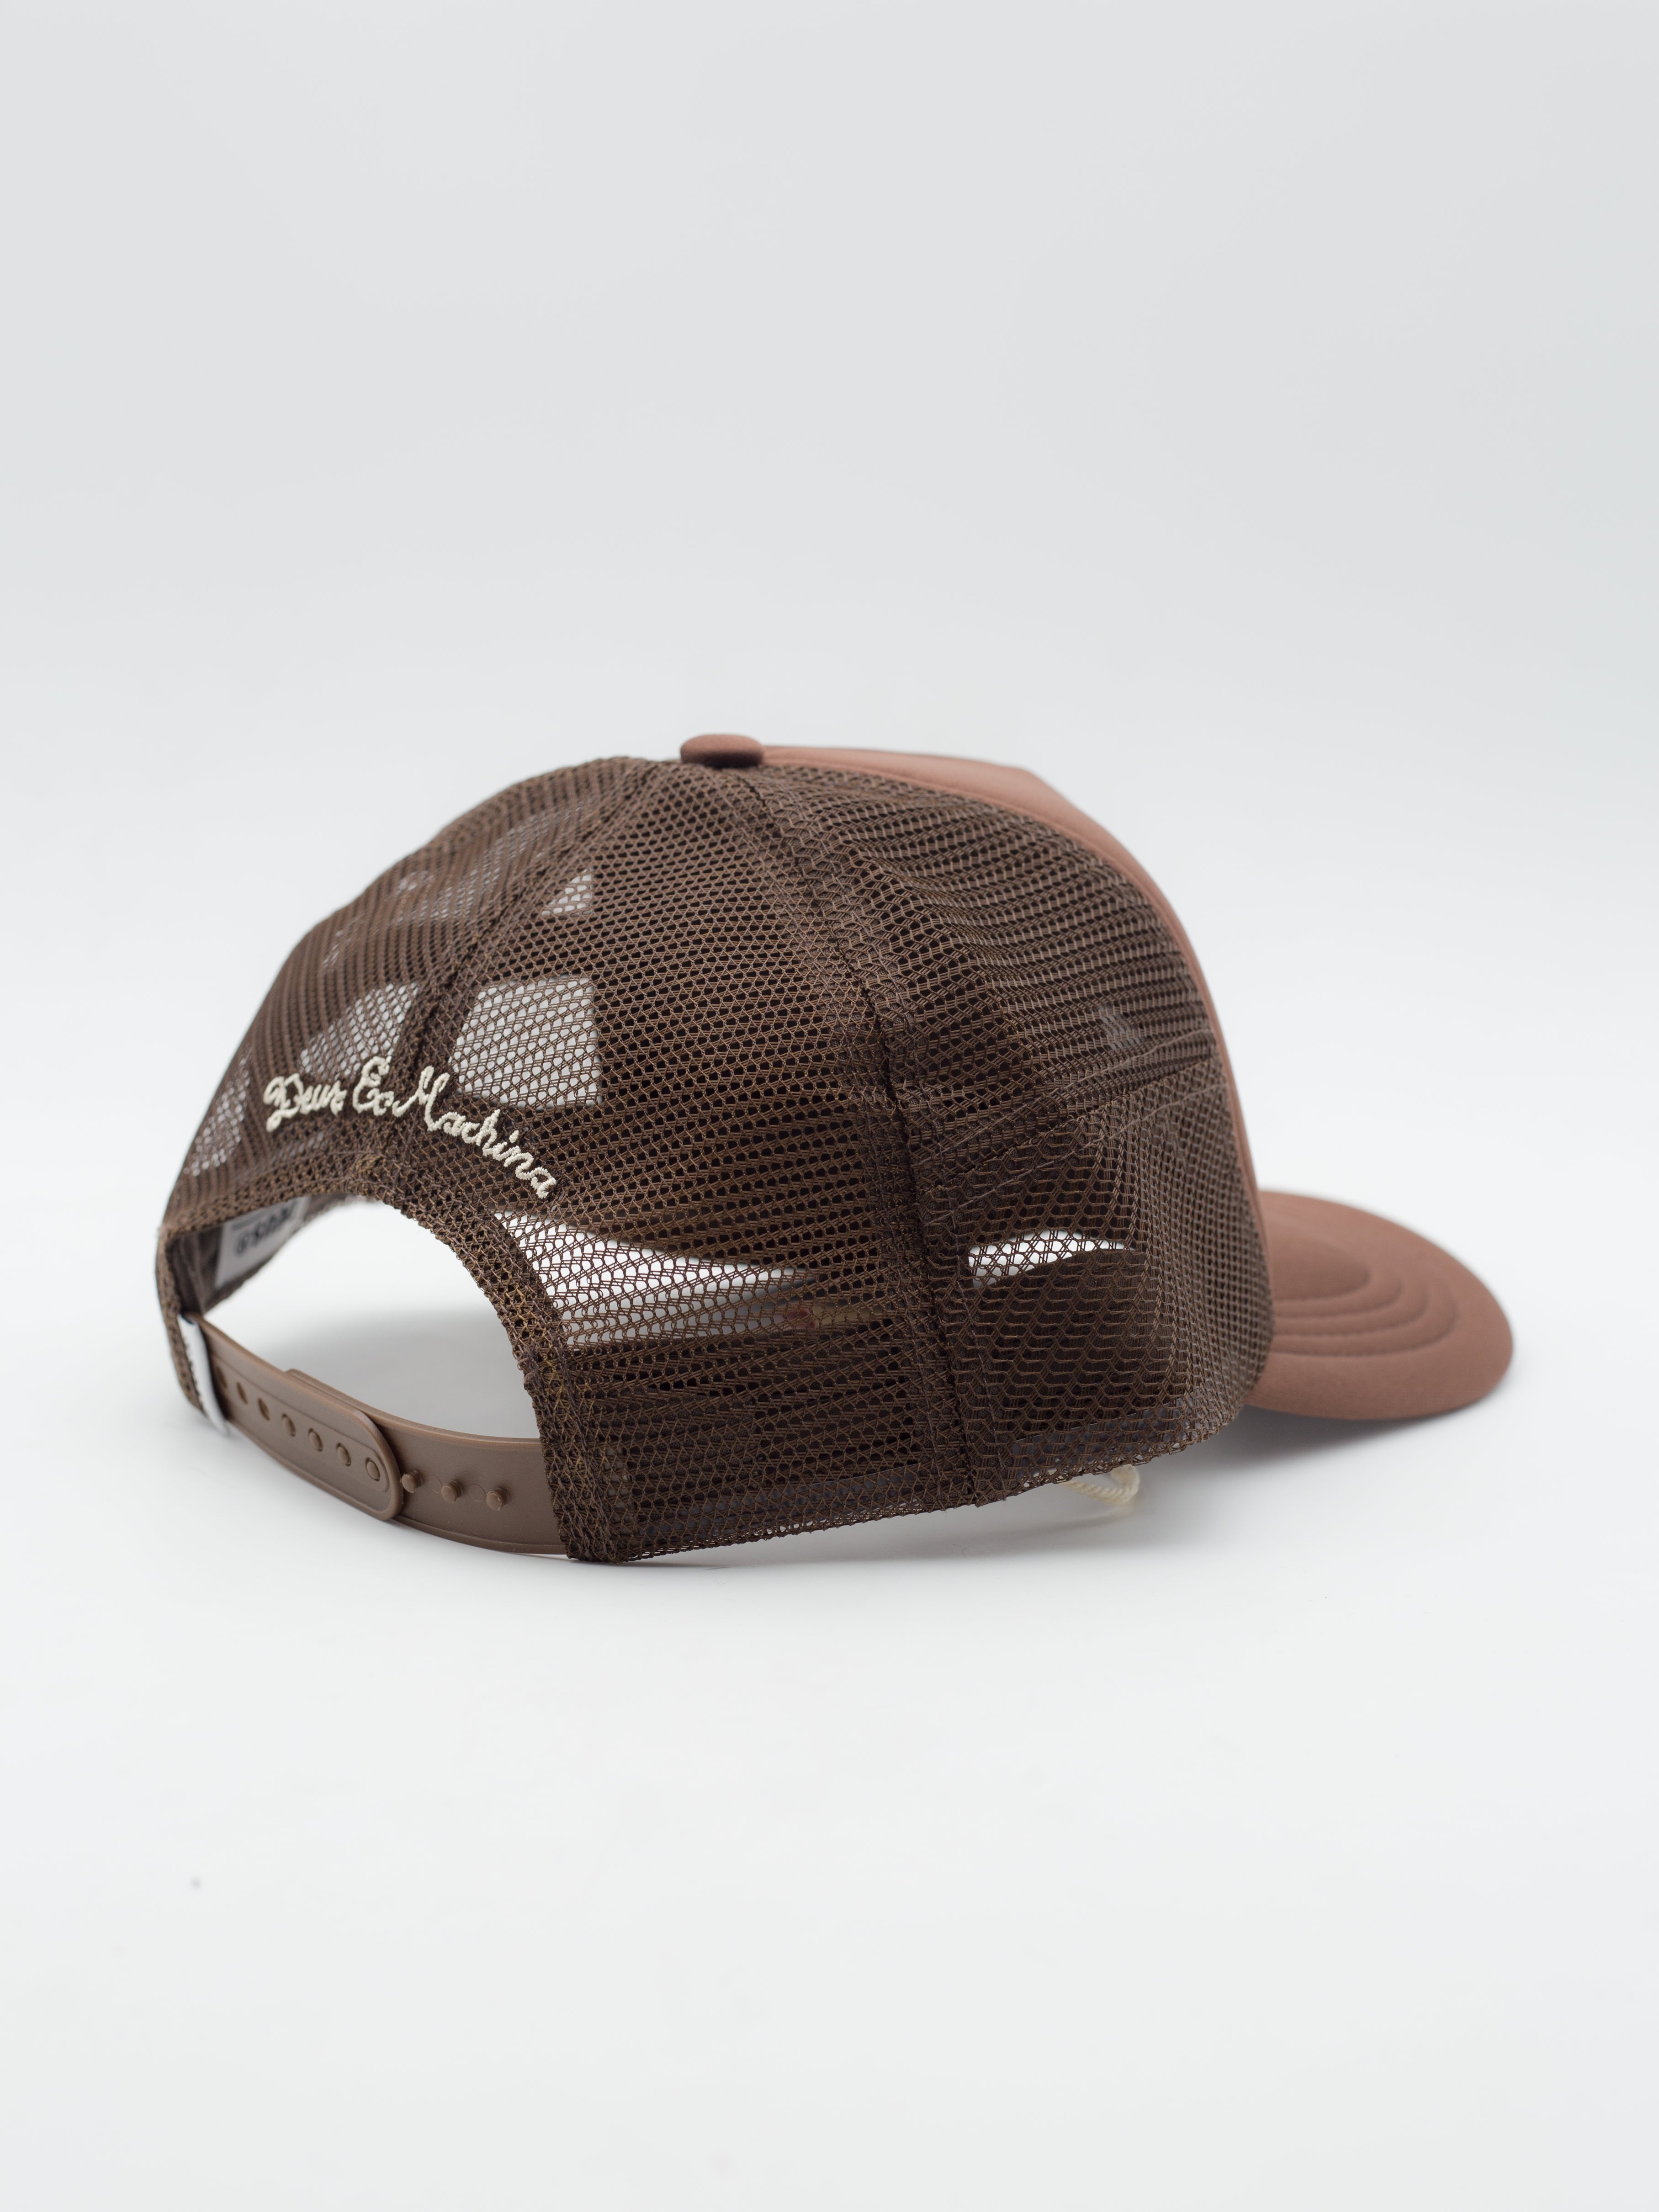 Amped Circle Trucker Brown